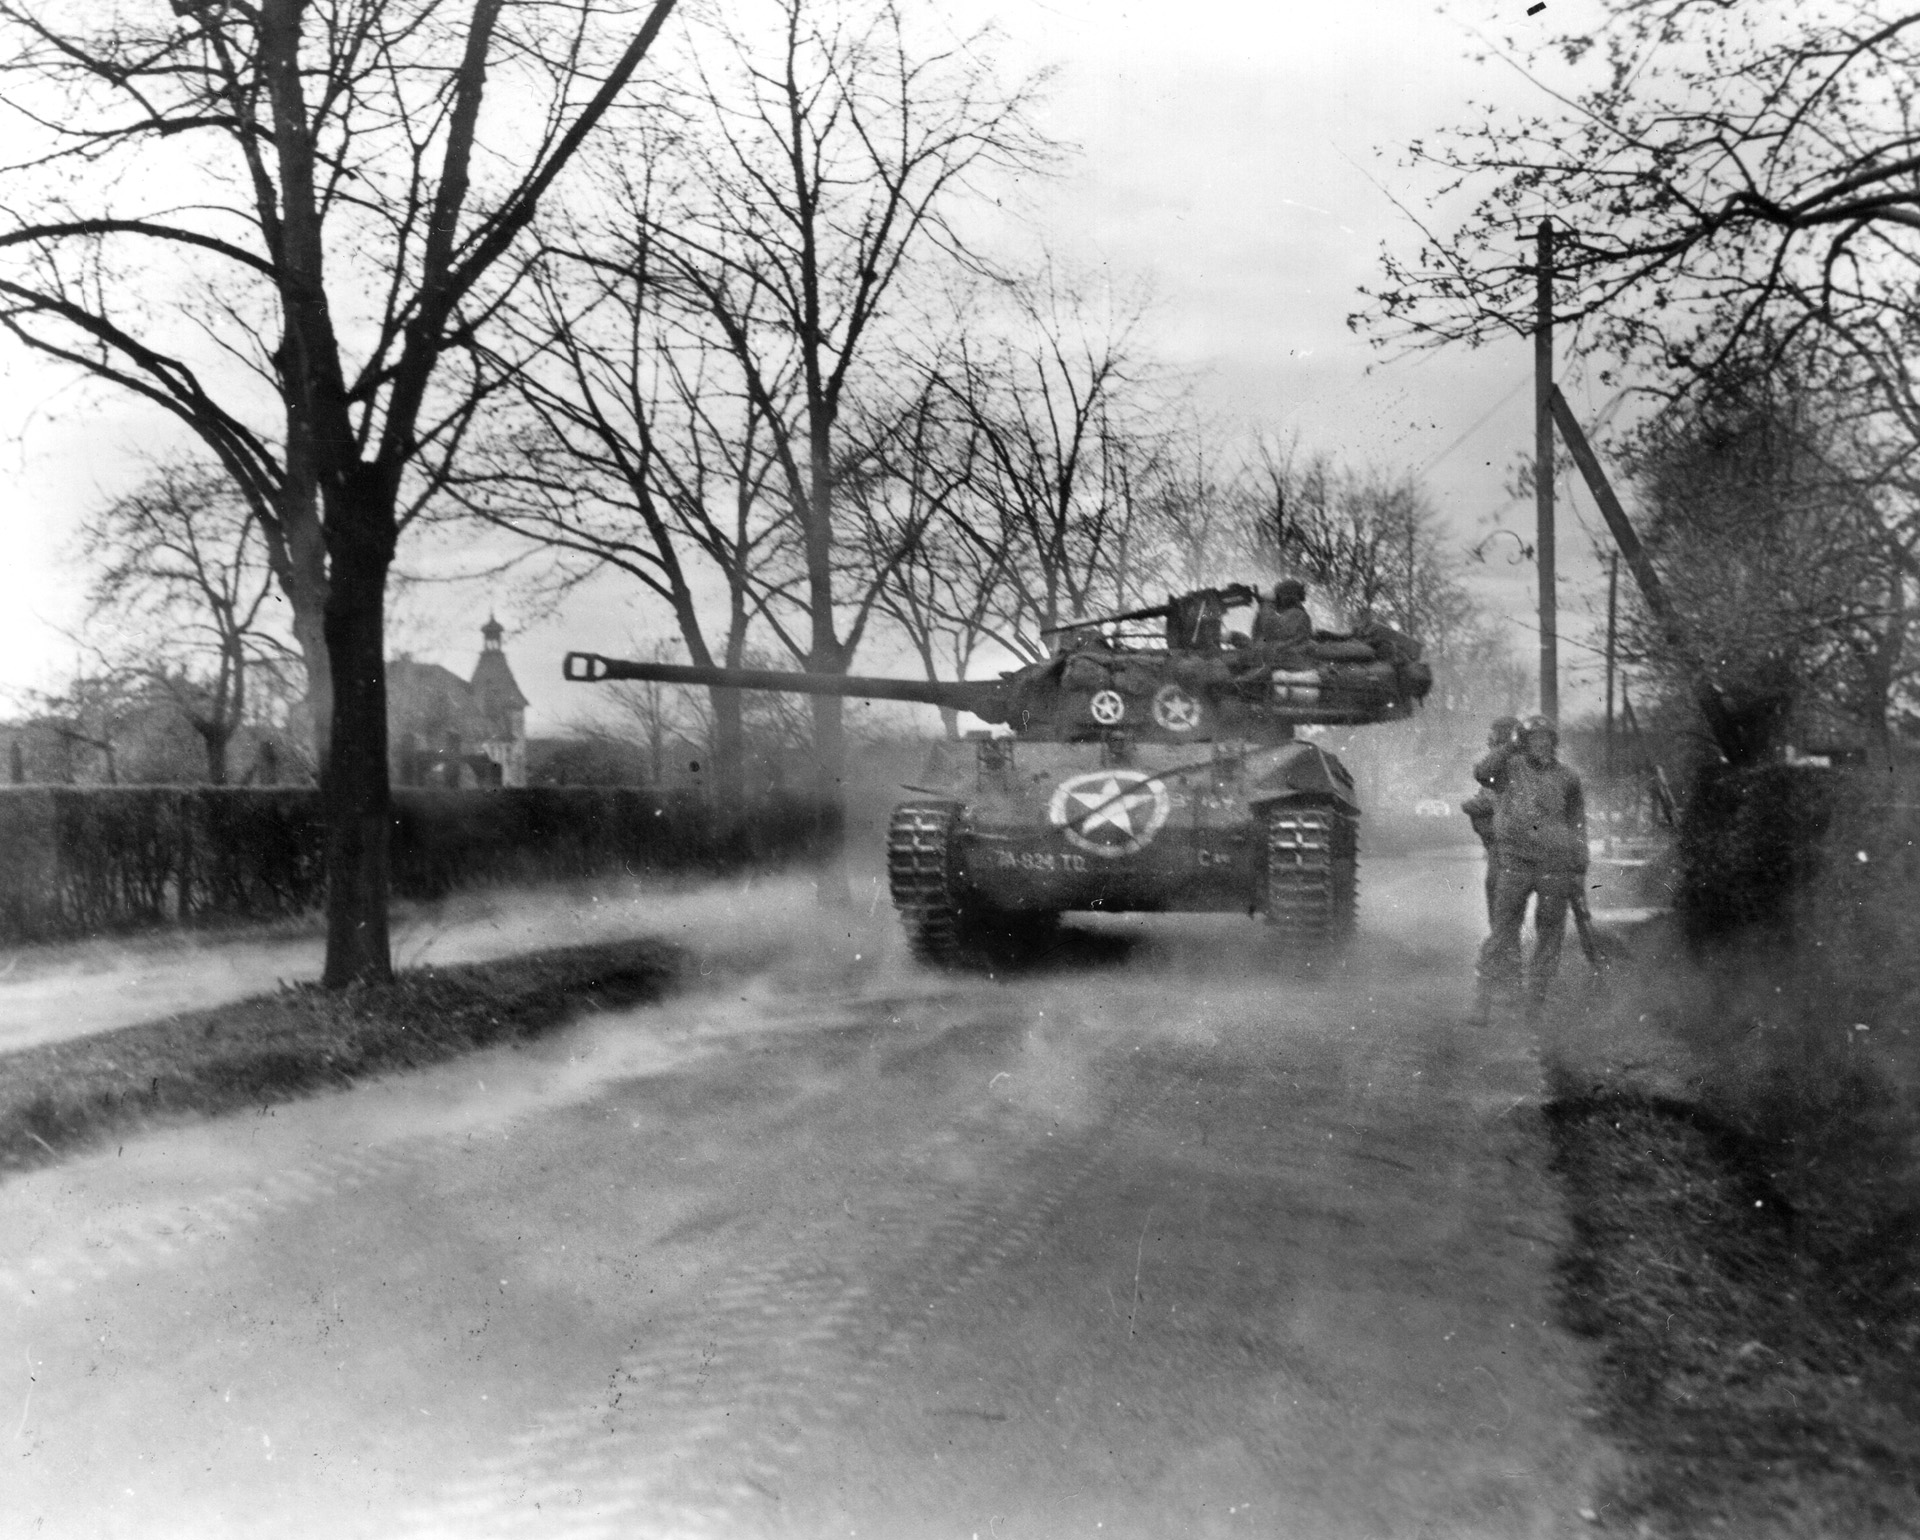 As men of the 397th Regiment look on, an M-18 tank destroyer fires in support of the assault on Wiesloch, Germany, April 1, 1945.